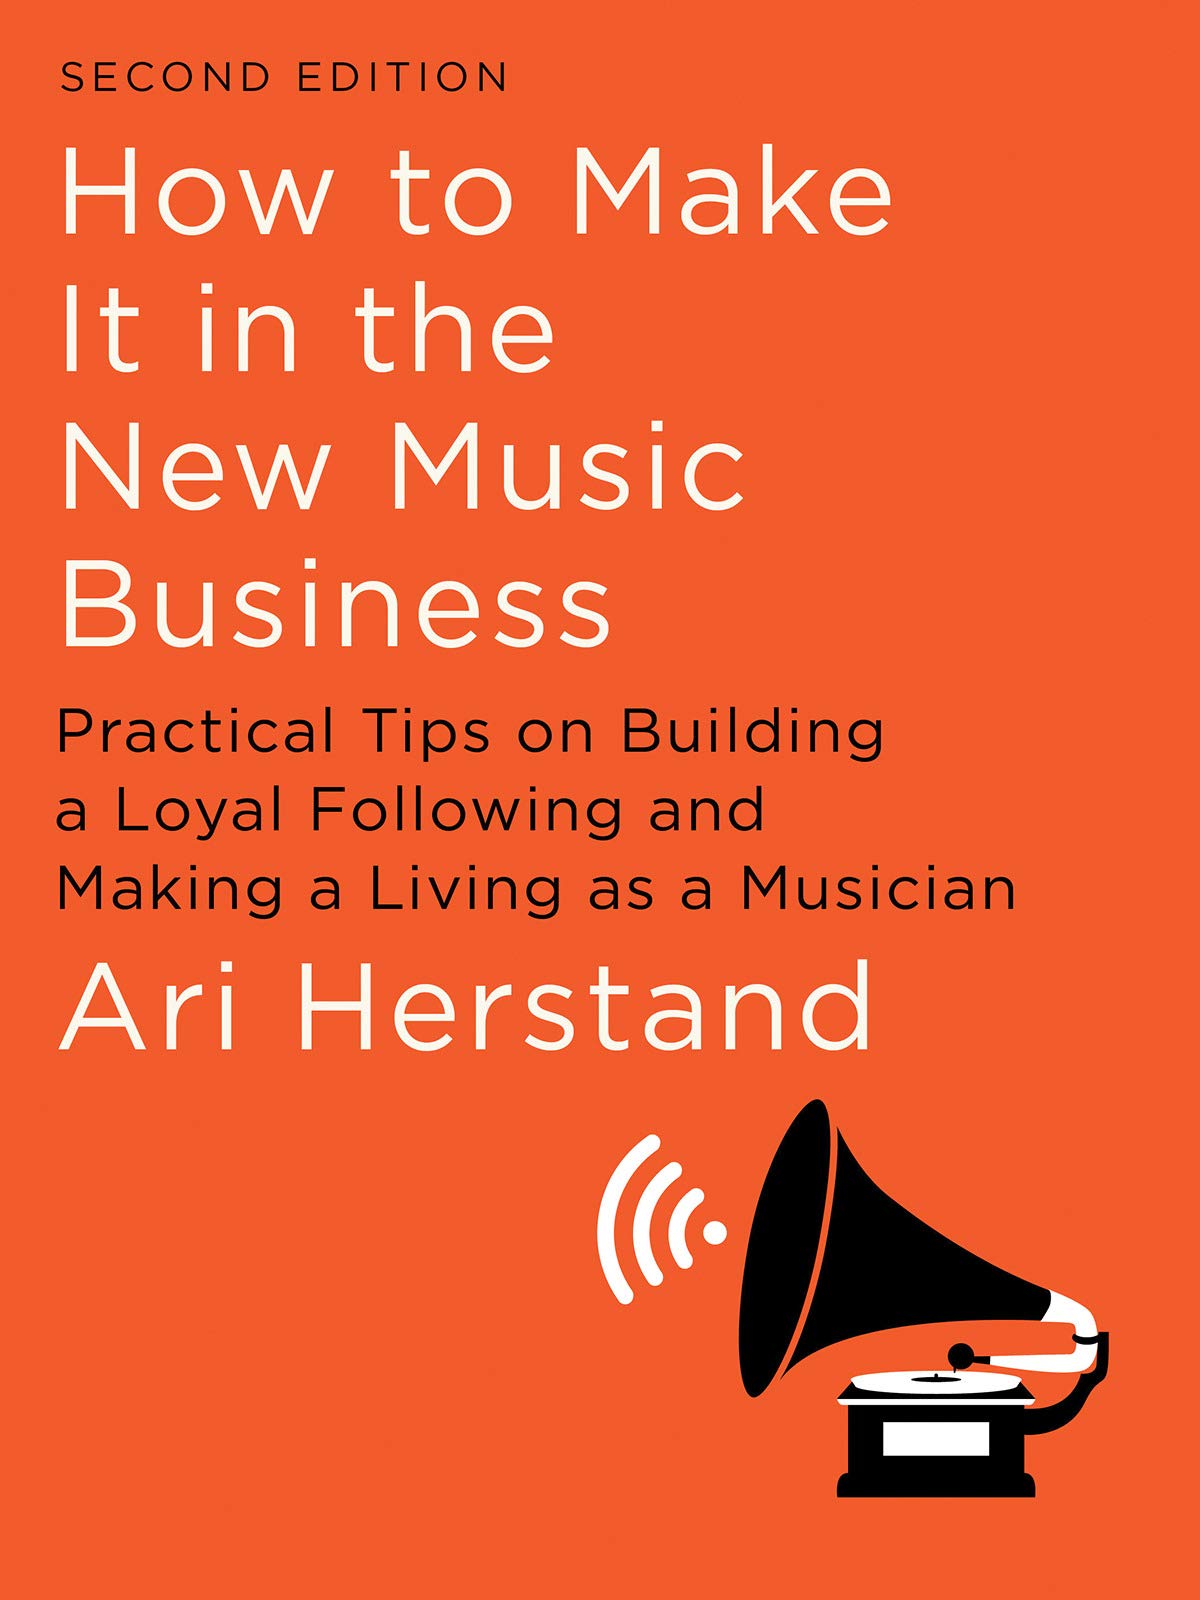 how to make it in the new music business book cover